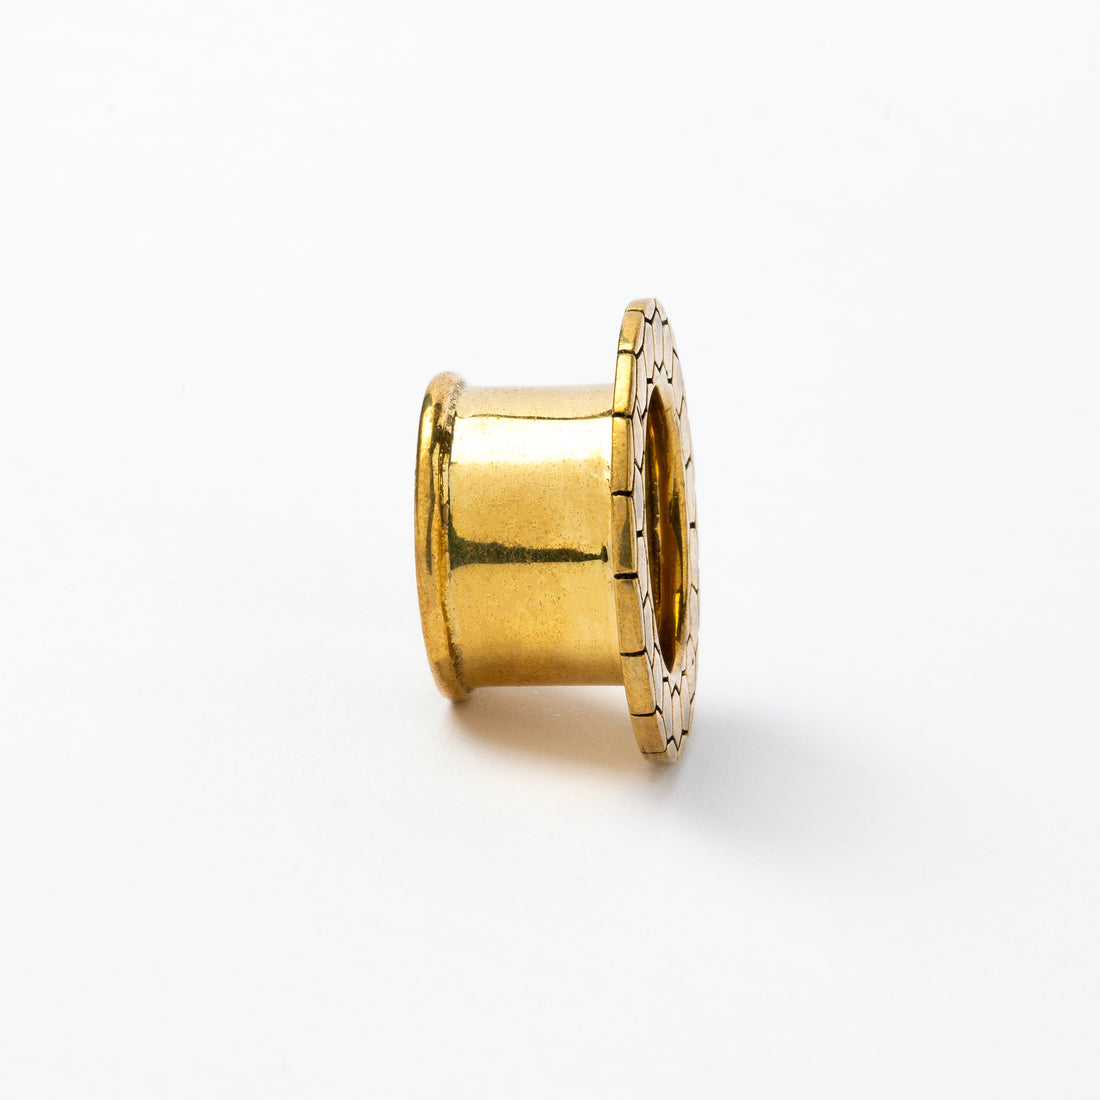 Honeycomb golden brass flesh tunnel for stretched ears side view